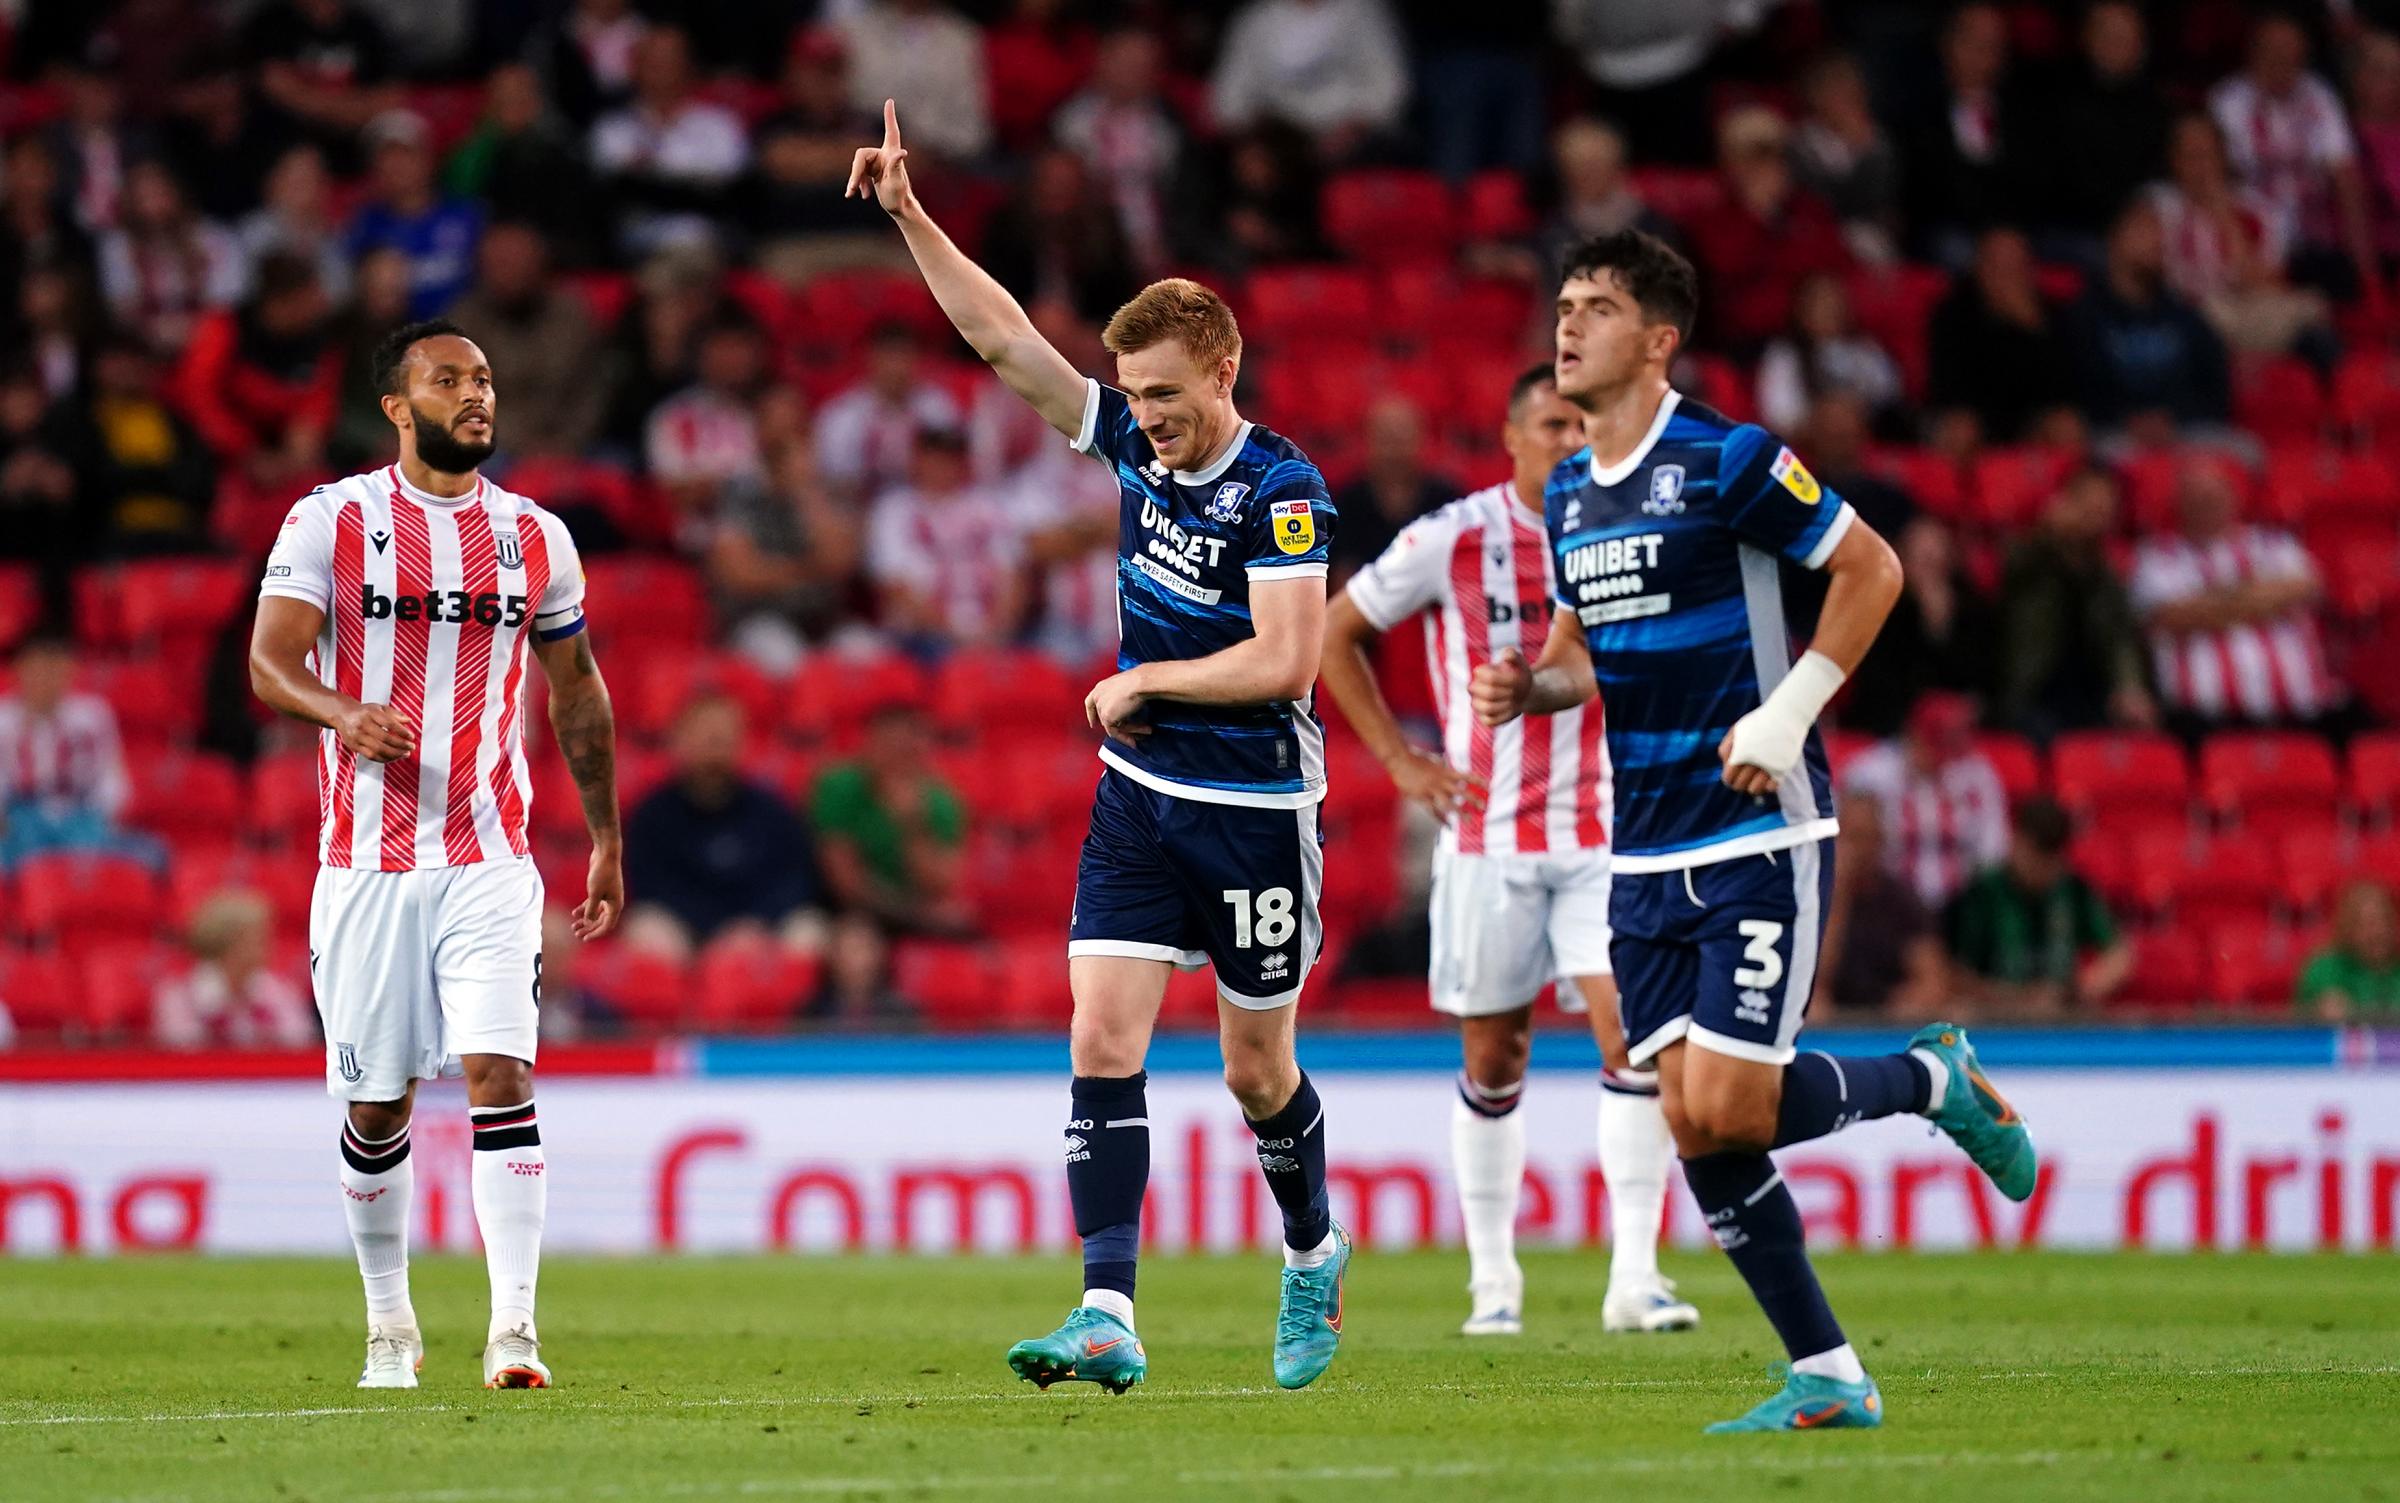 Middlesbrough: Duncan Watmore on his 'special feeling at Boro'